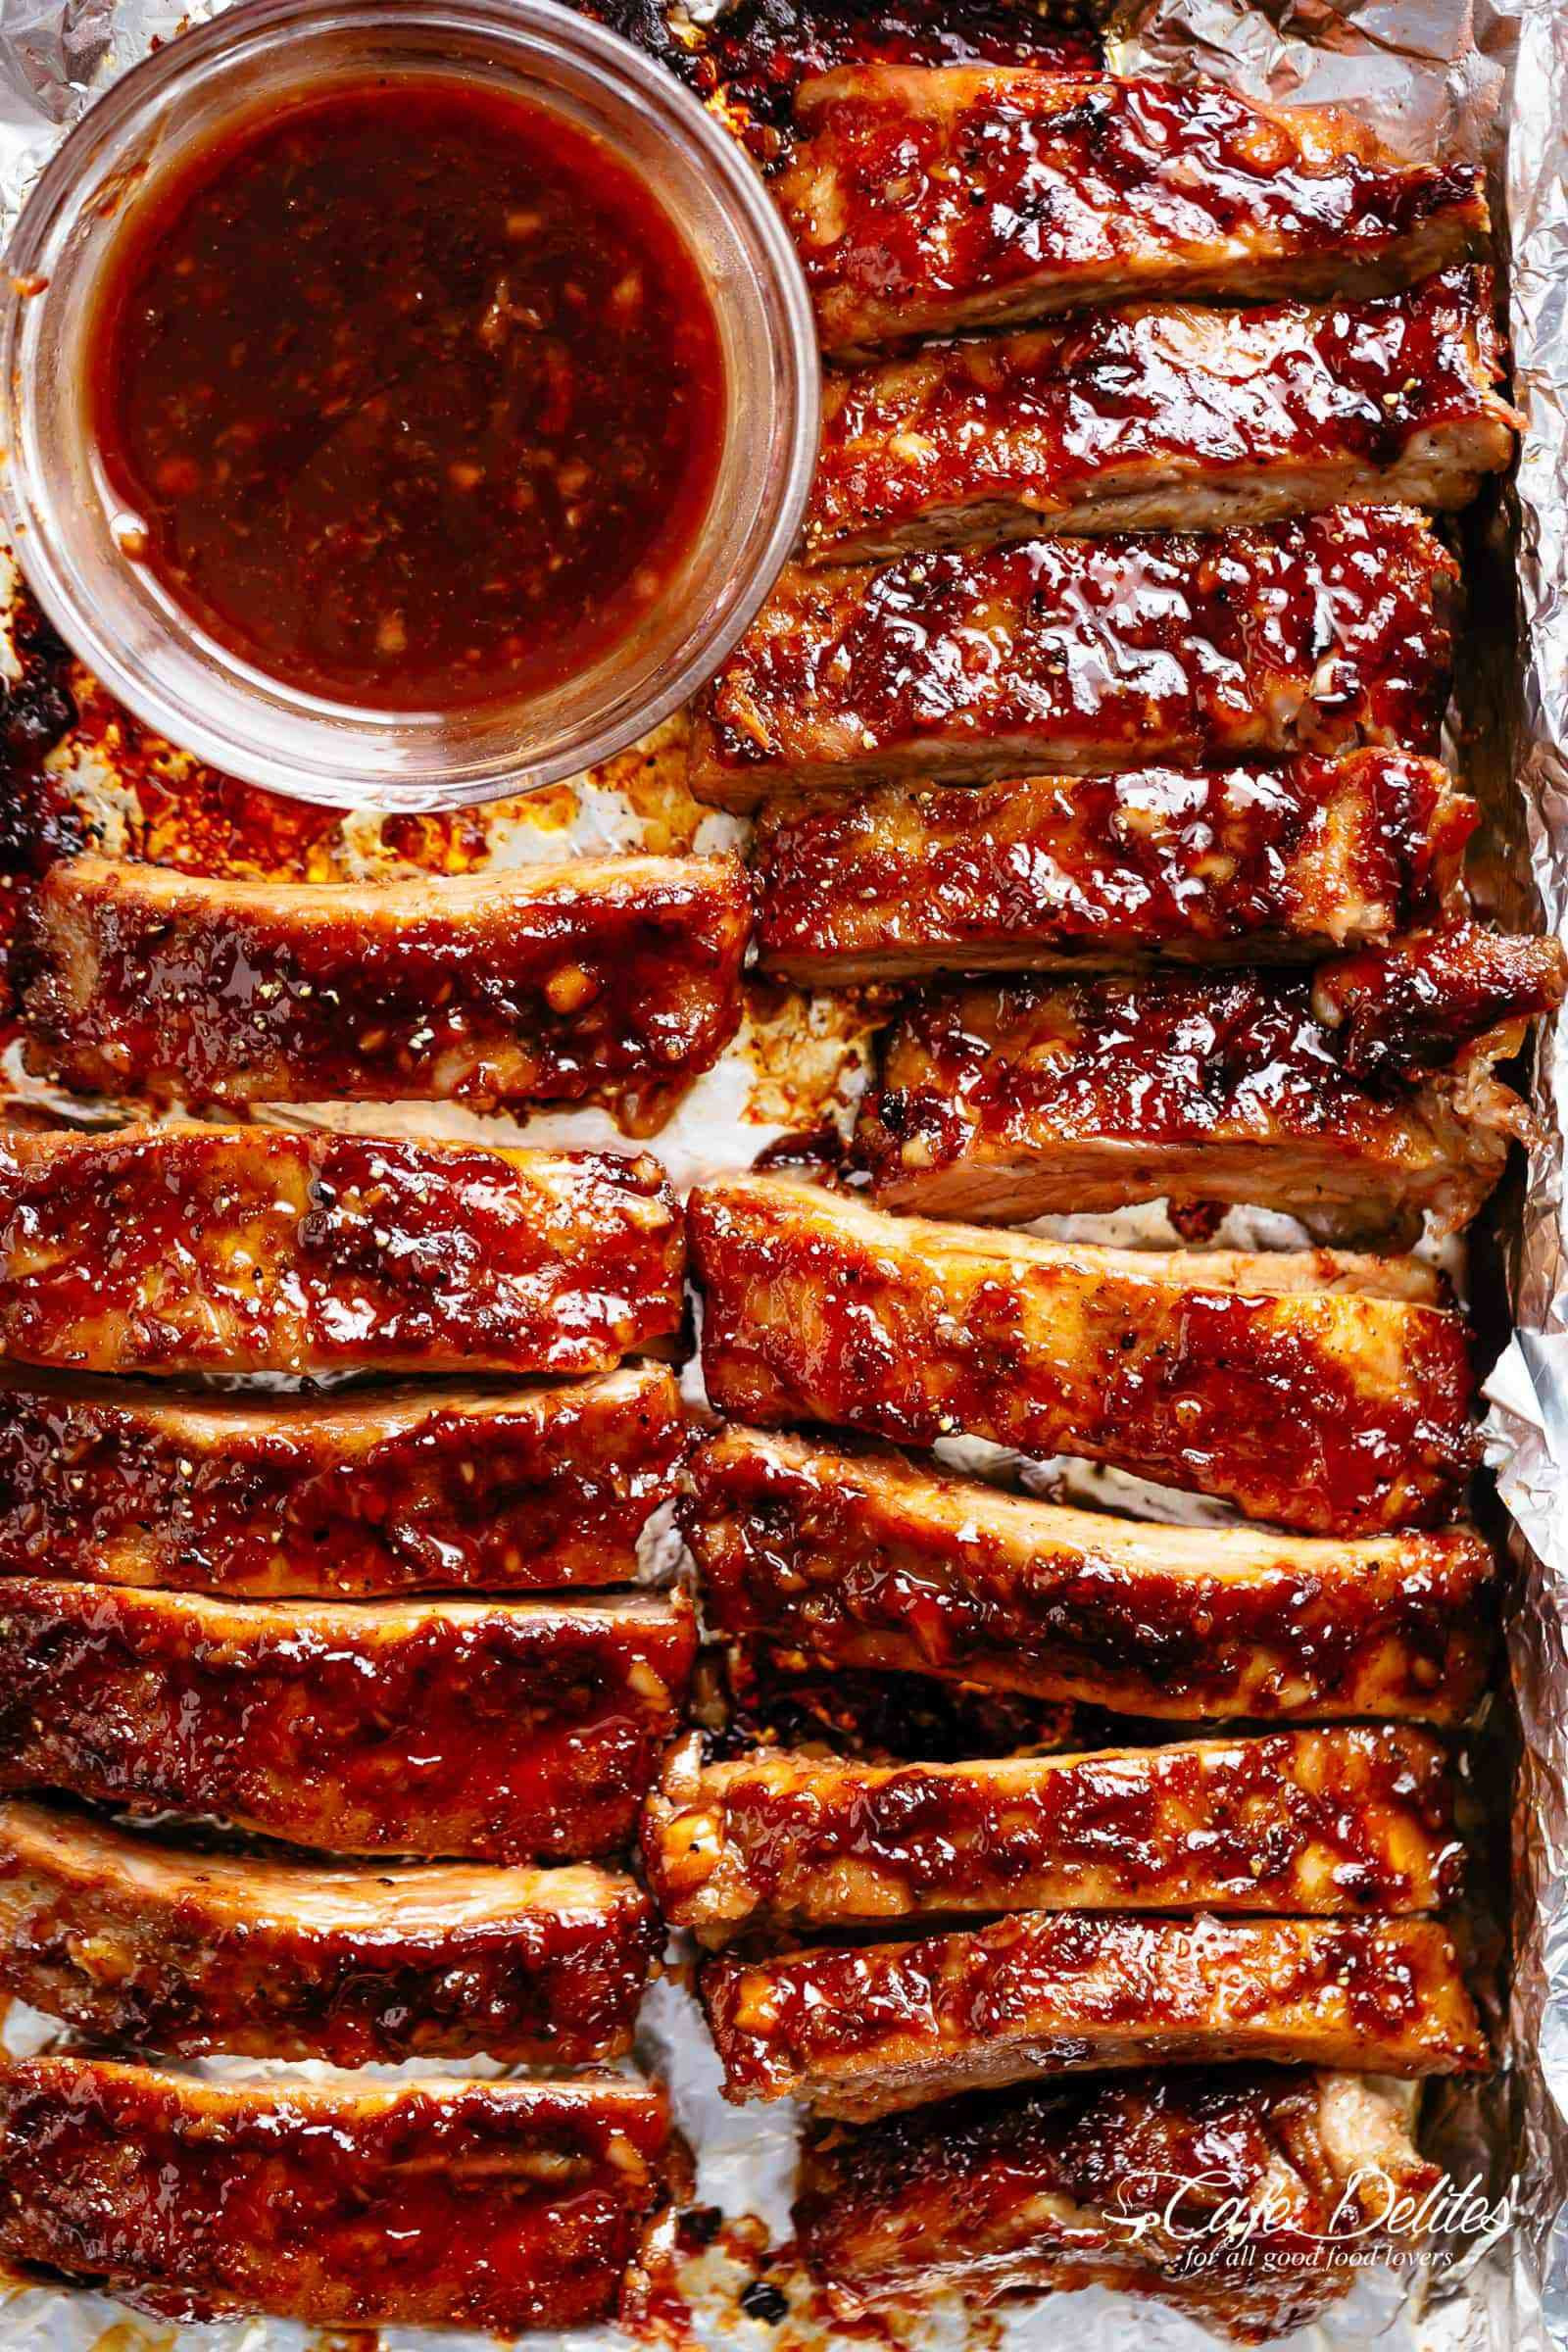 Grilled Pork Spare Ribs Recipe
 Ribs Oven cafedelites